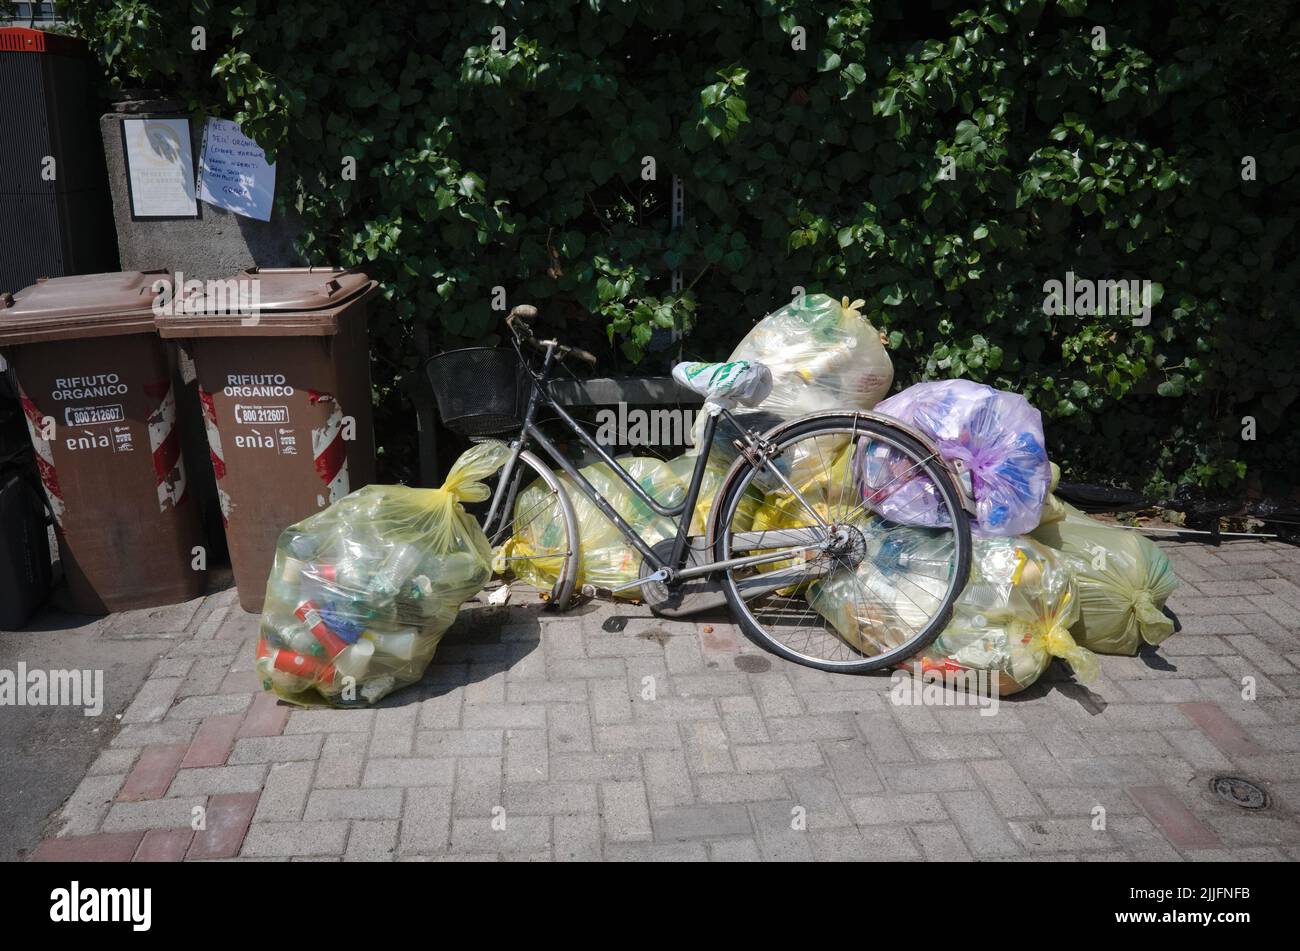 Parma, Italy - July, 2022: Old bicycle with basket on handlebar and broken wheel among garbage bags with plastic near brown trash cans. Discarded bike Stock Photo